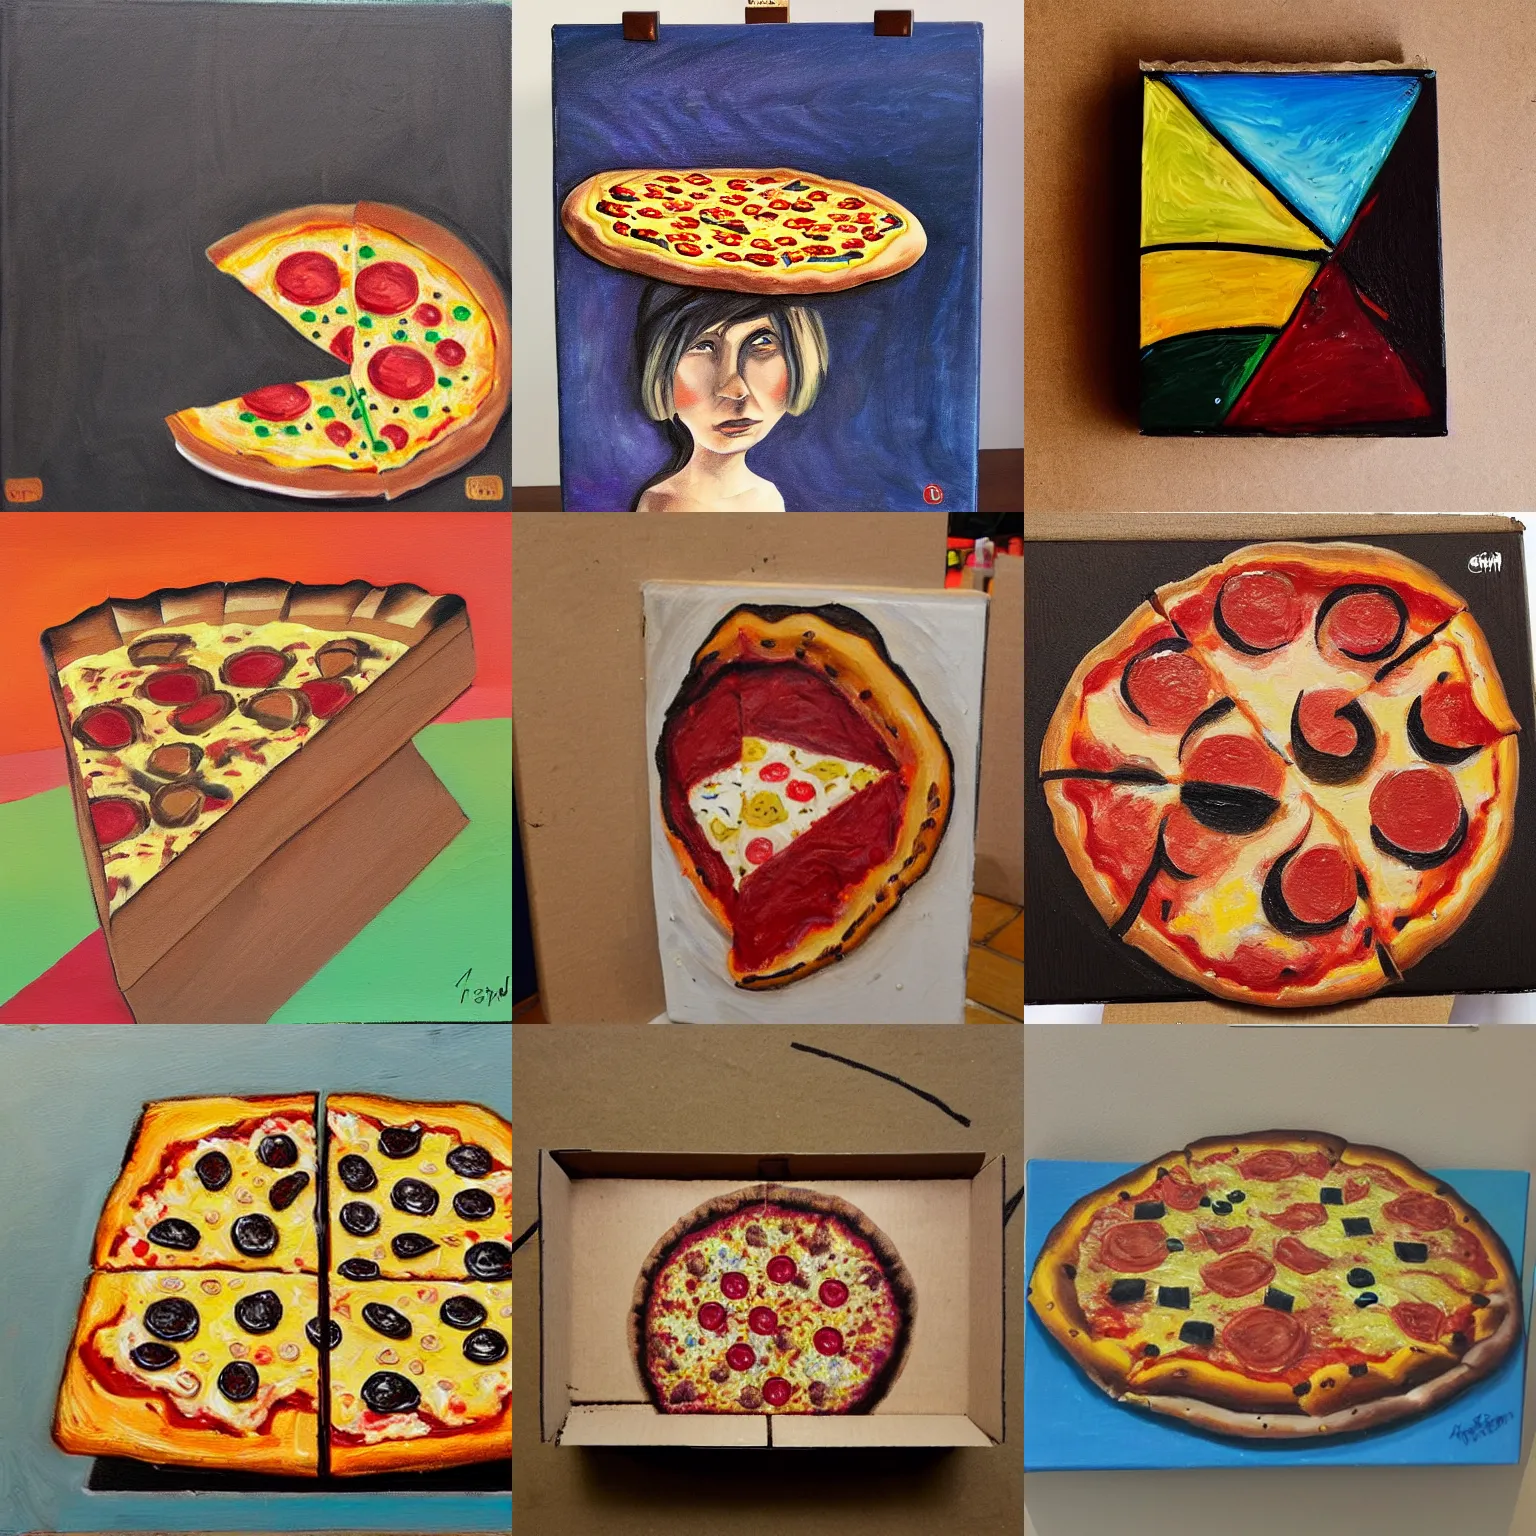 Prompt: Worthless art so terrible that not even a billionaire could be tricked into buying it, oil on pizza box